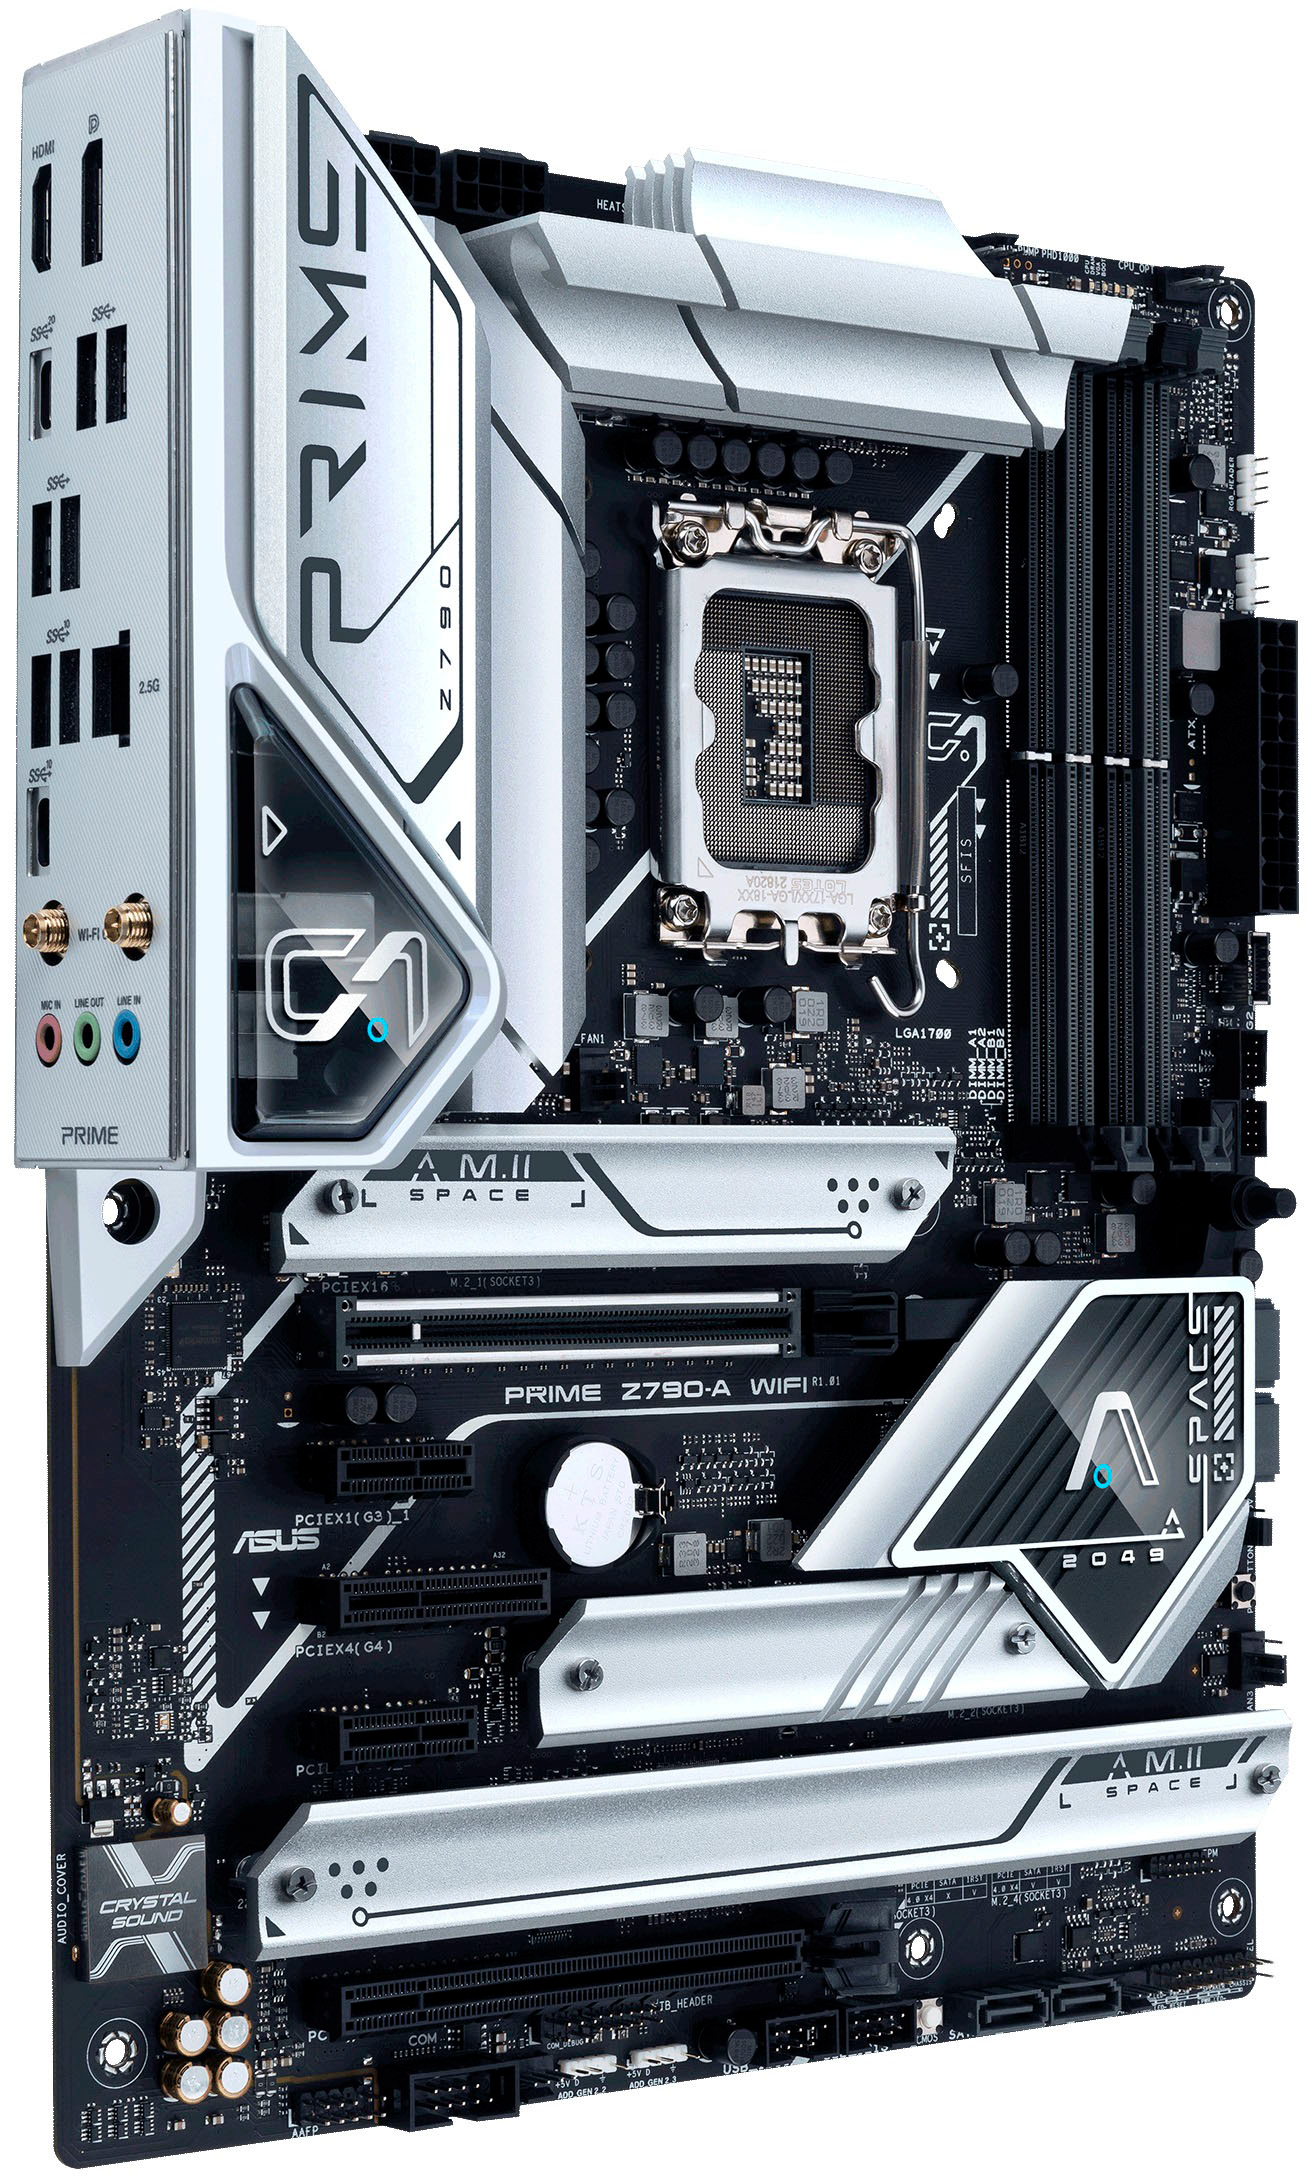 Best Buy: Intel Extreme Series ATX Motherboard 2400MHz (Socket 2011)  BOXDX79SI